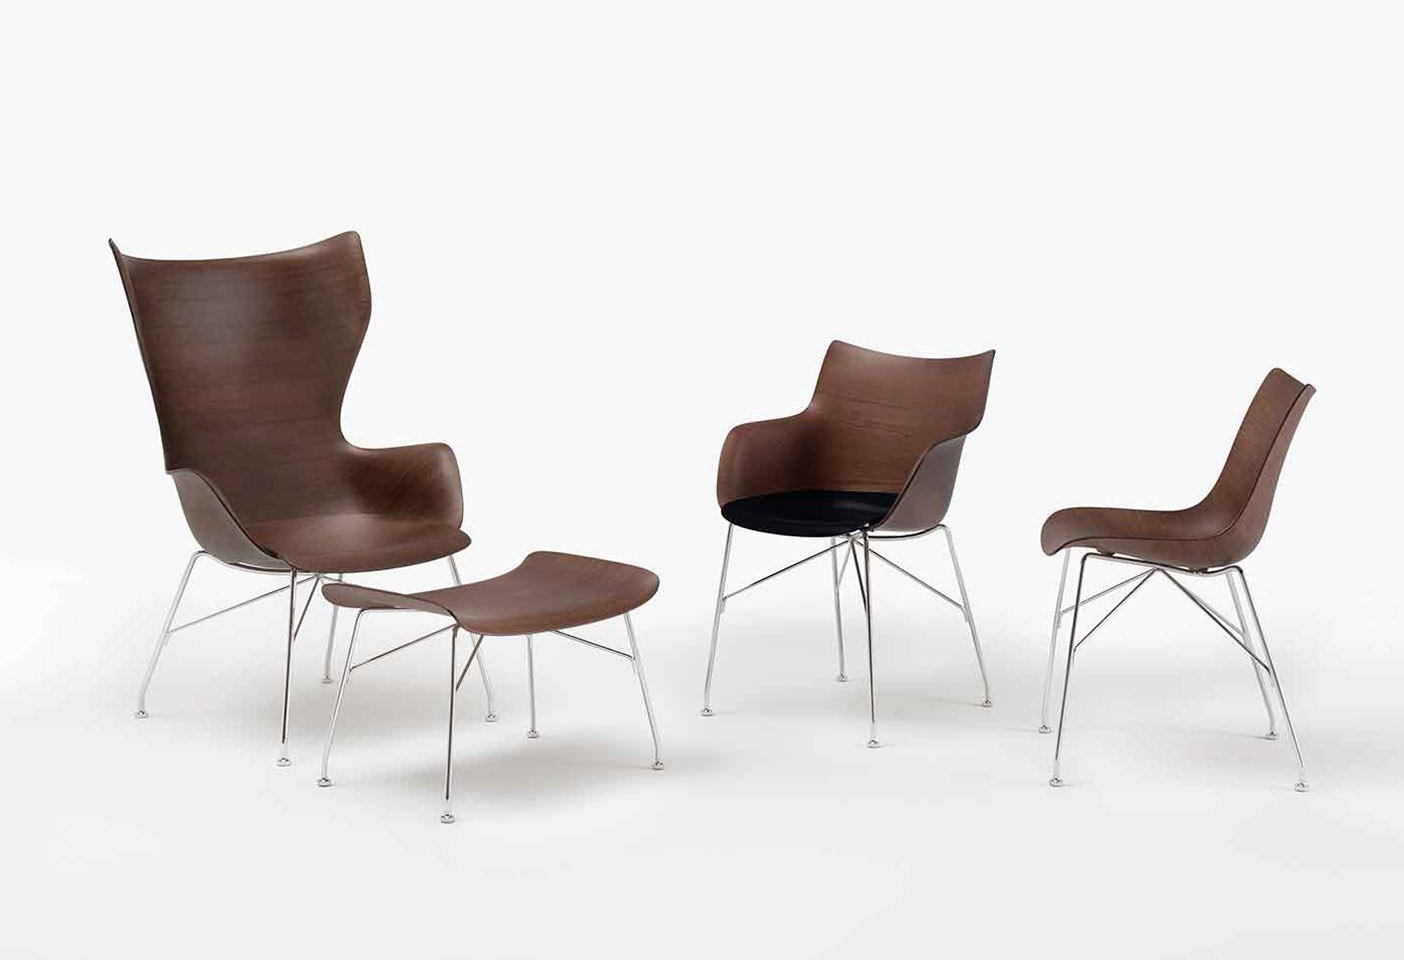 The P/Wood chair designed by Philippe Starck for the Smart Wood range is joined by the Q/Wood with arms, the K/Wood armchair and the S/Wood ottomon, here and following. Photo c/o Kartell. 